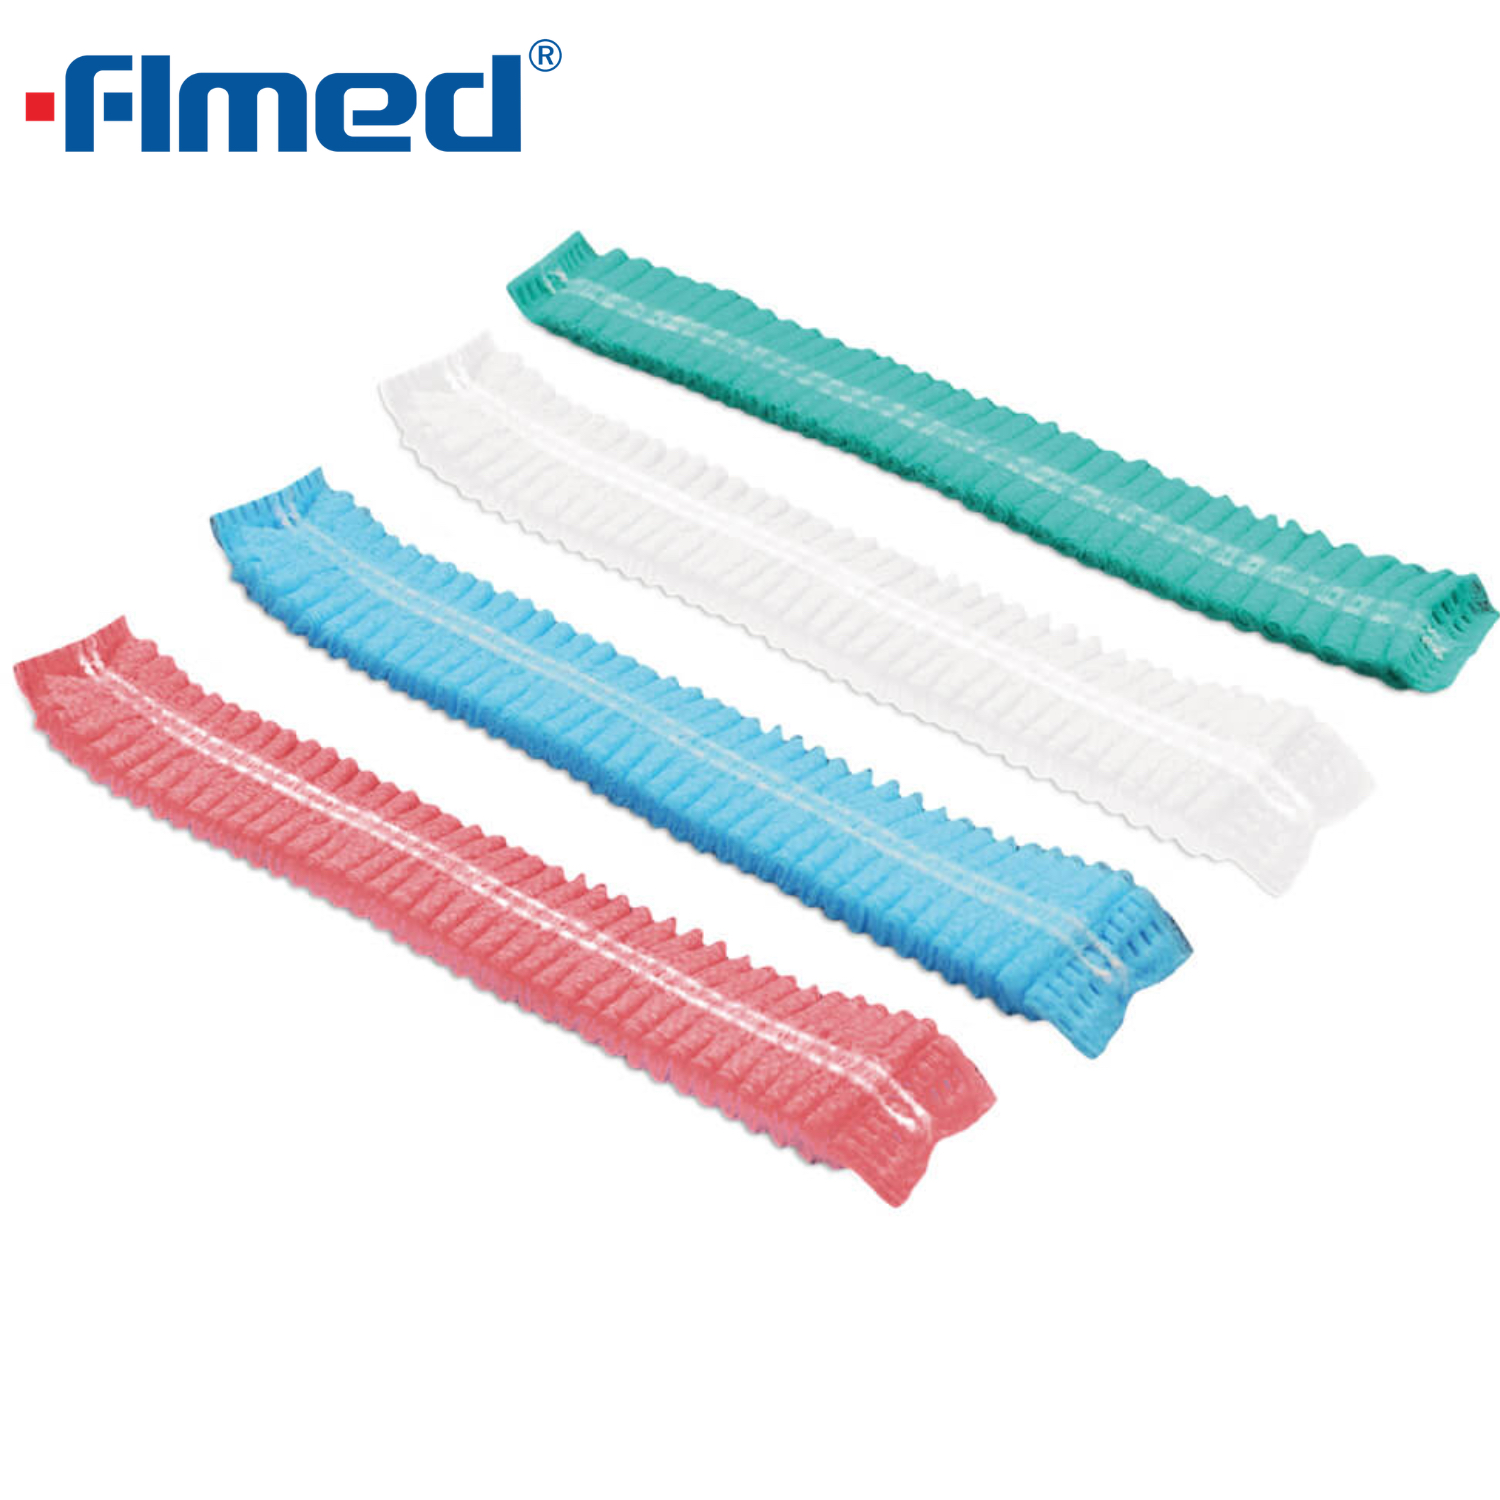 Disposable Medical Cap with Tie